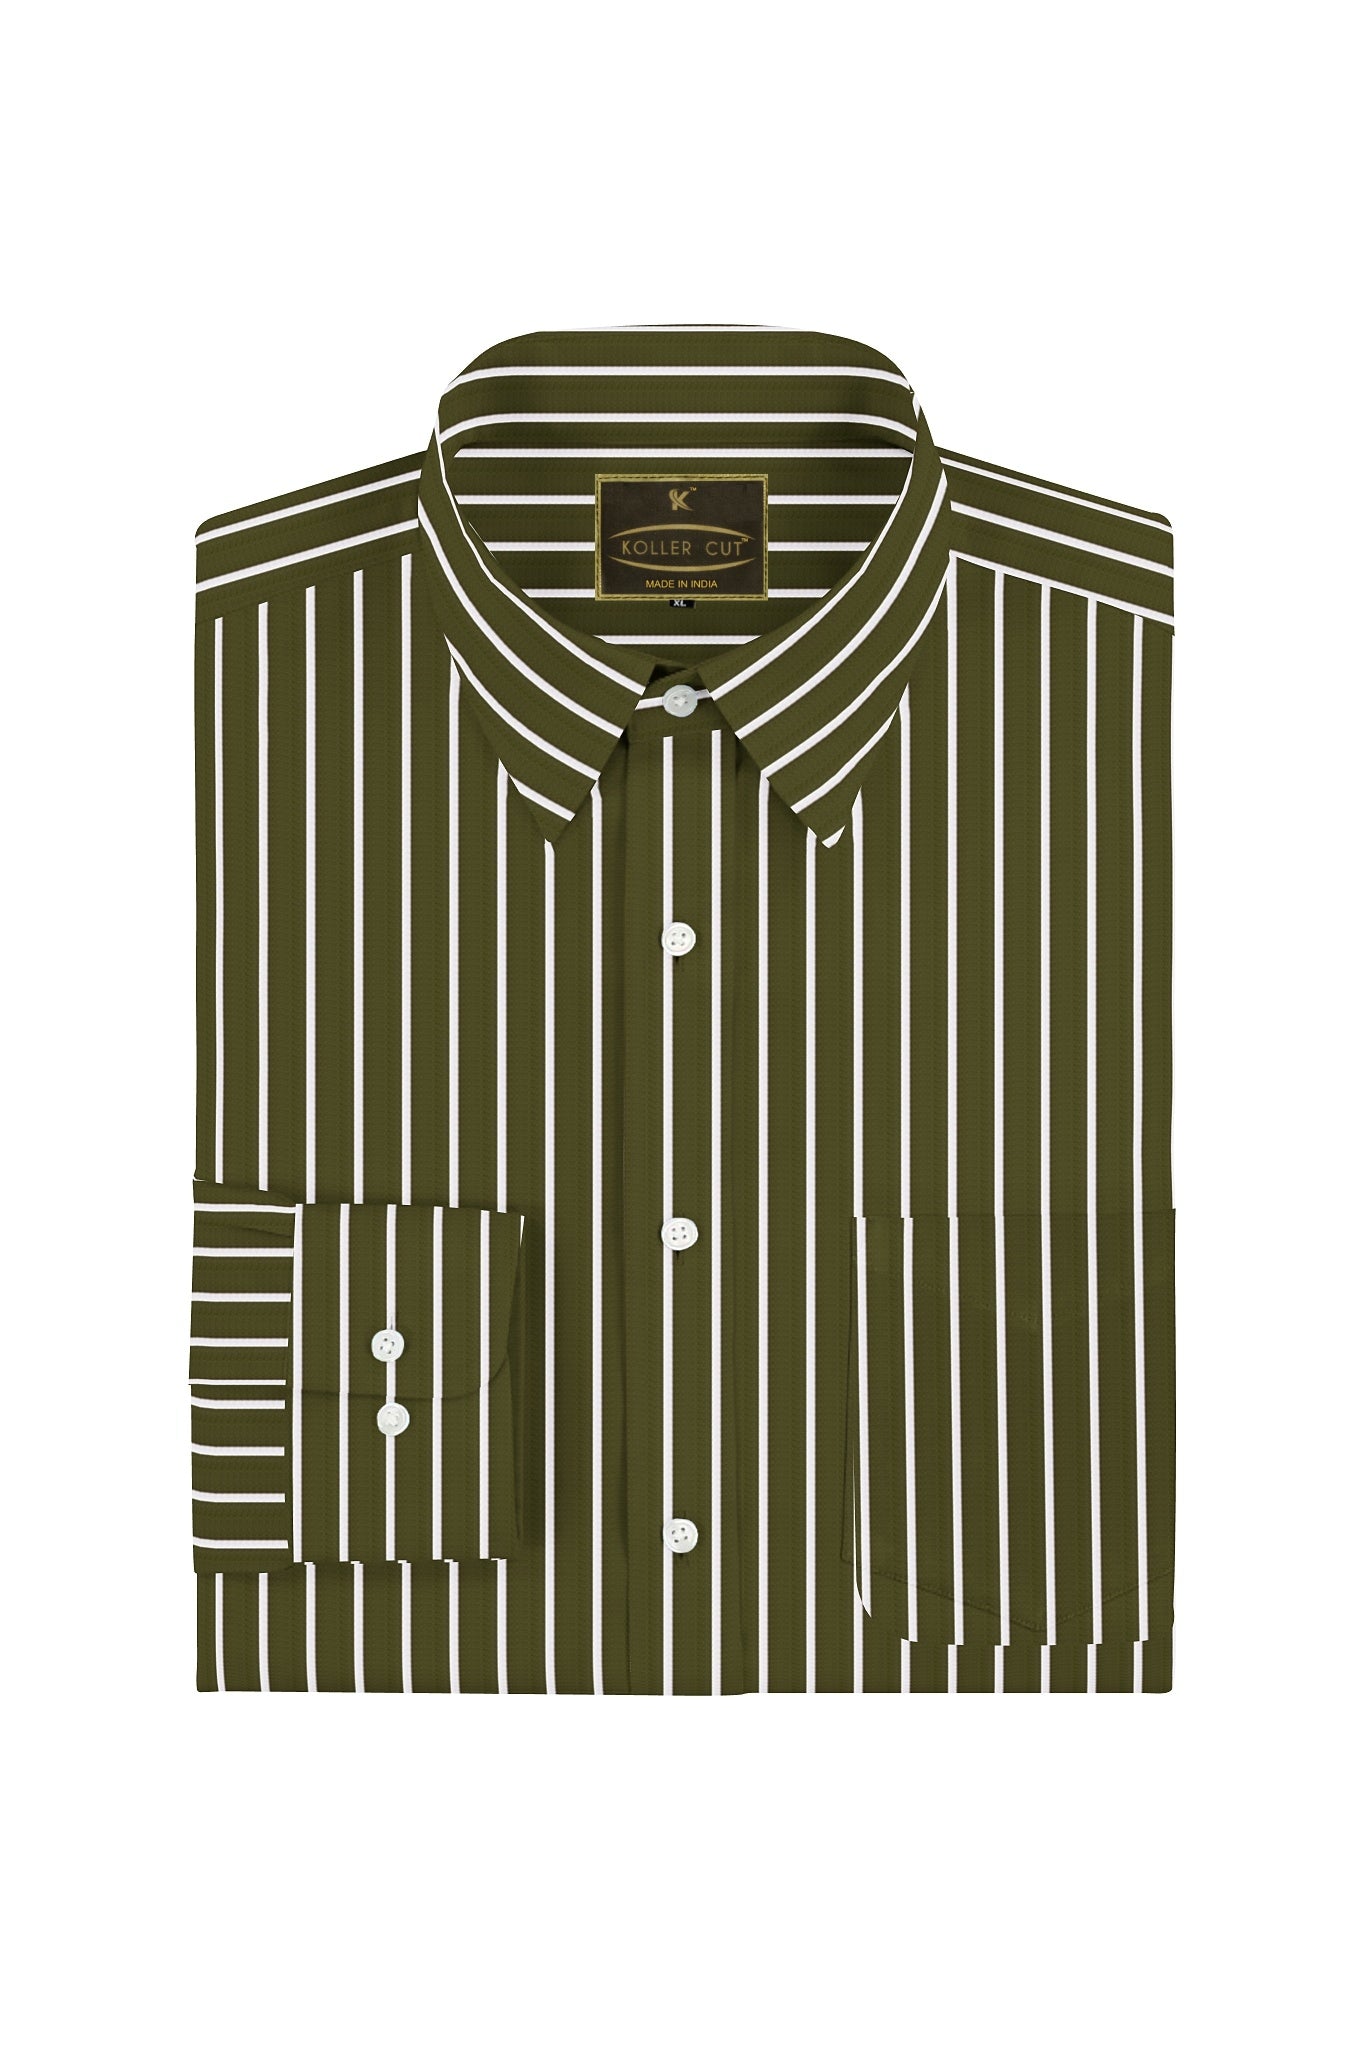 Olive Green and White Pinstripes Men's Cotton Shirt